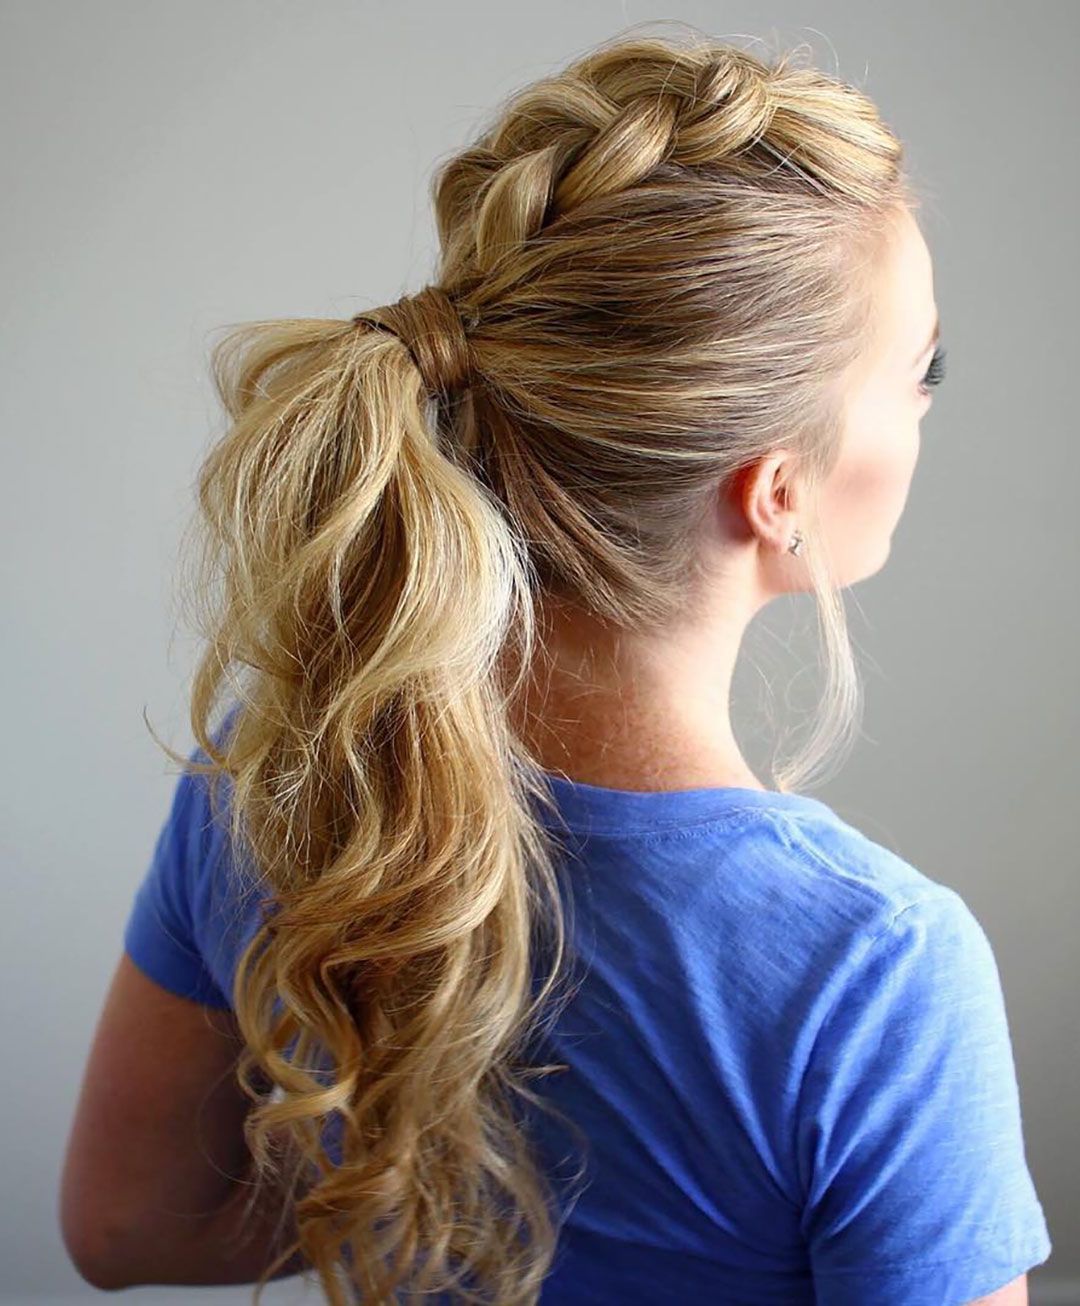 21 Insanely Easy Ponytail Hairstyles – Best Ponytail Ideas For Any Occasion